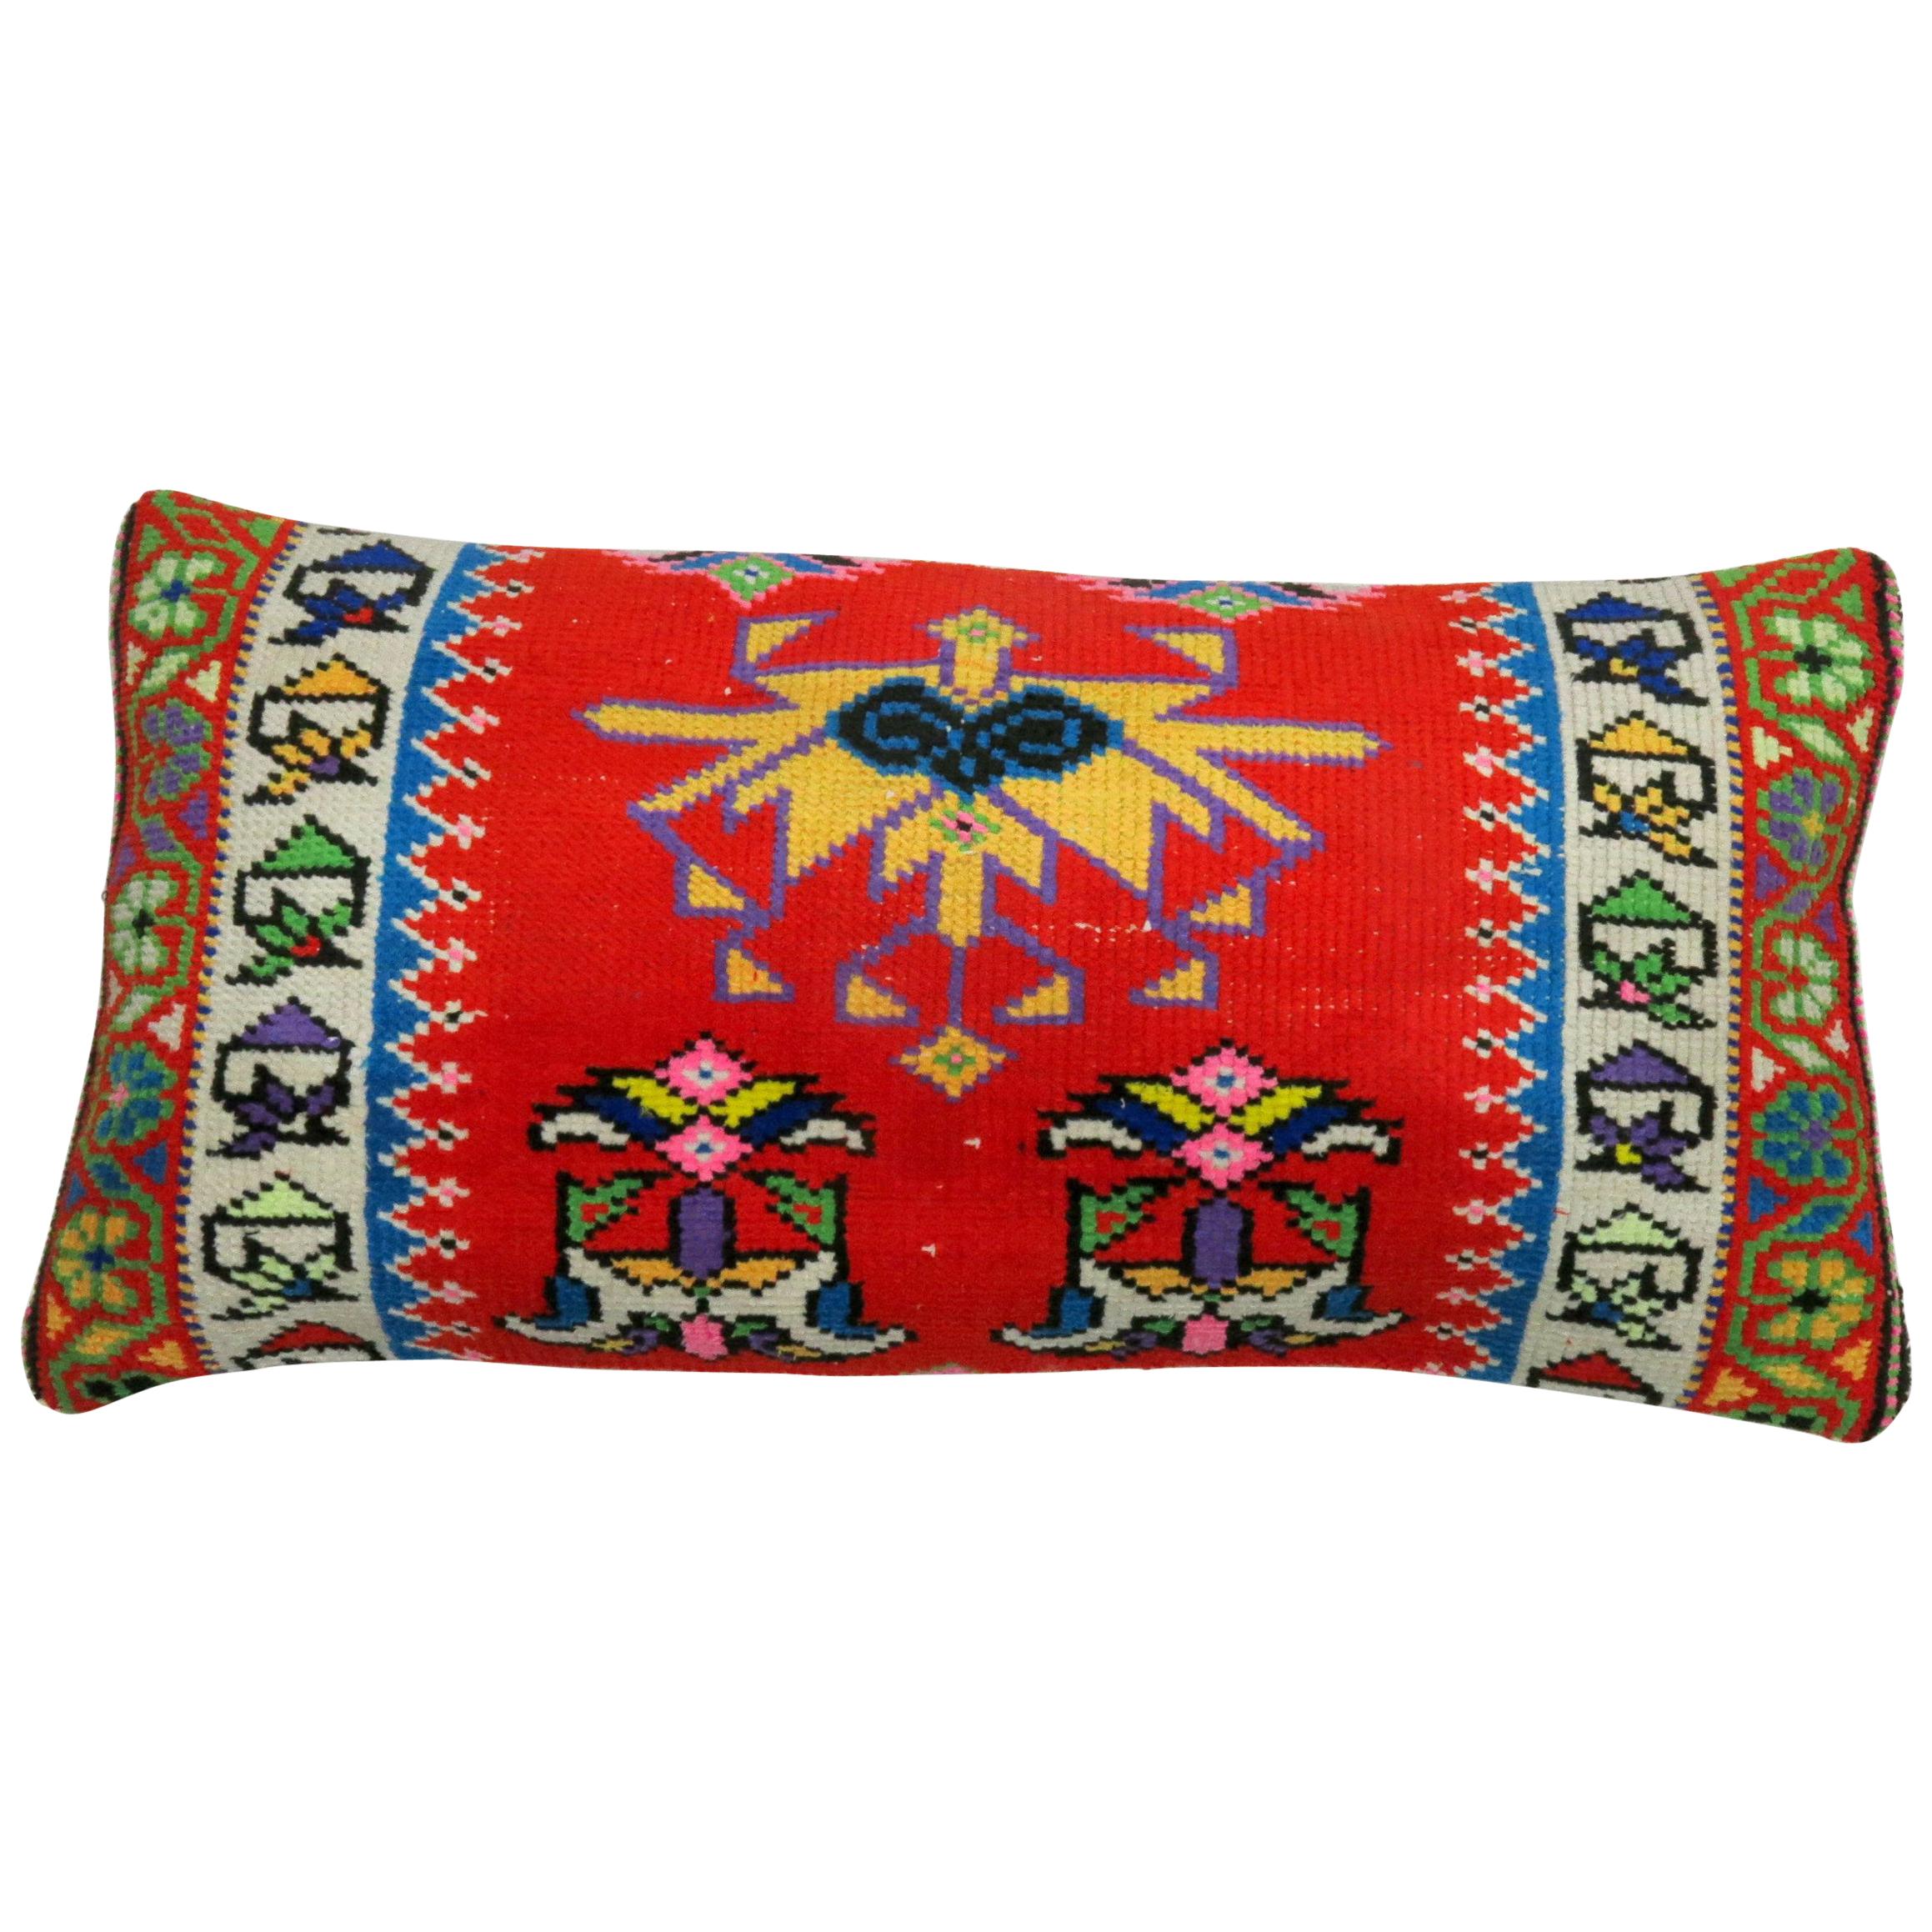 Vibrant Red and Blue Large Vintage Turkish Bolster Size Rug Pillow